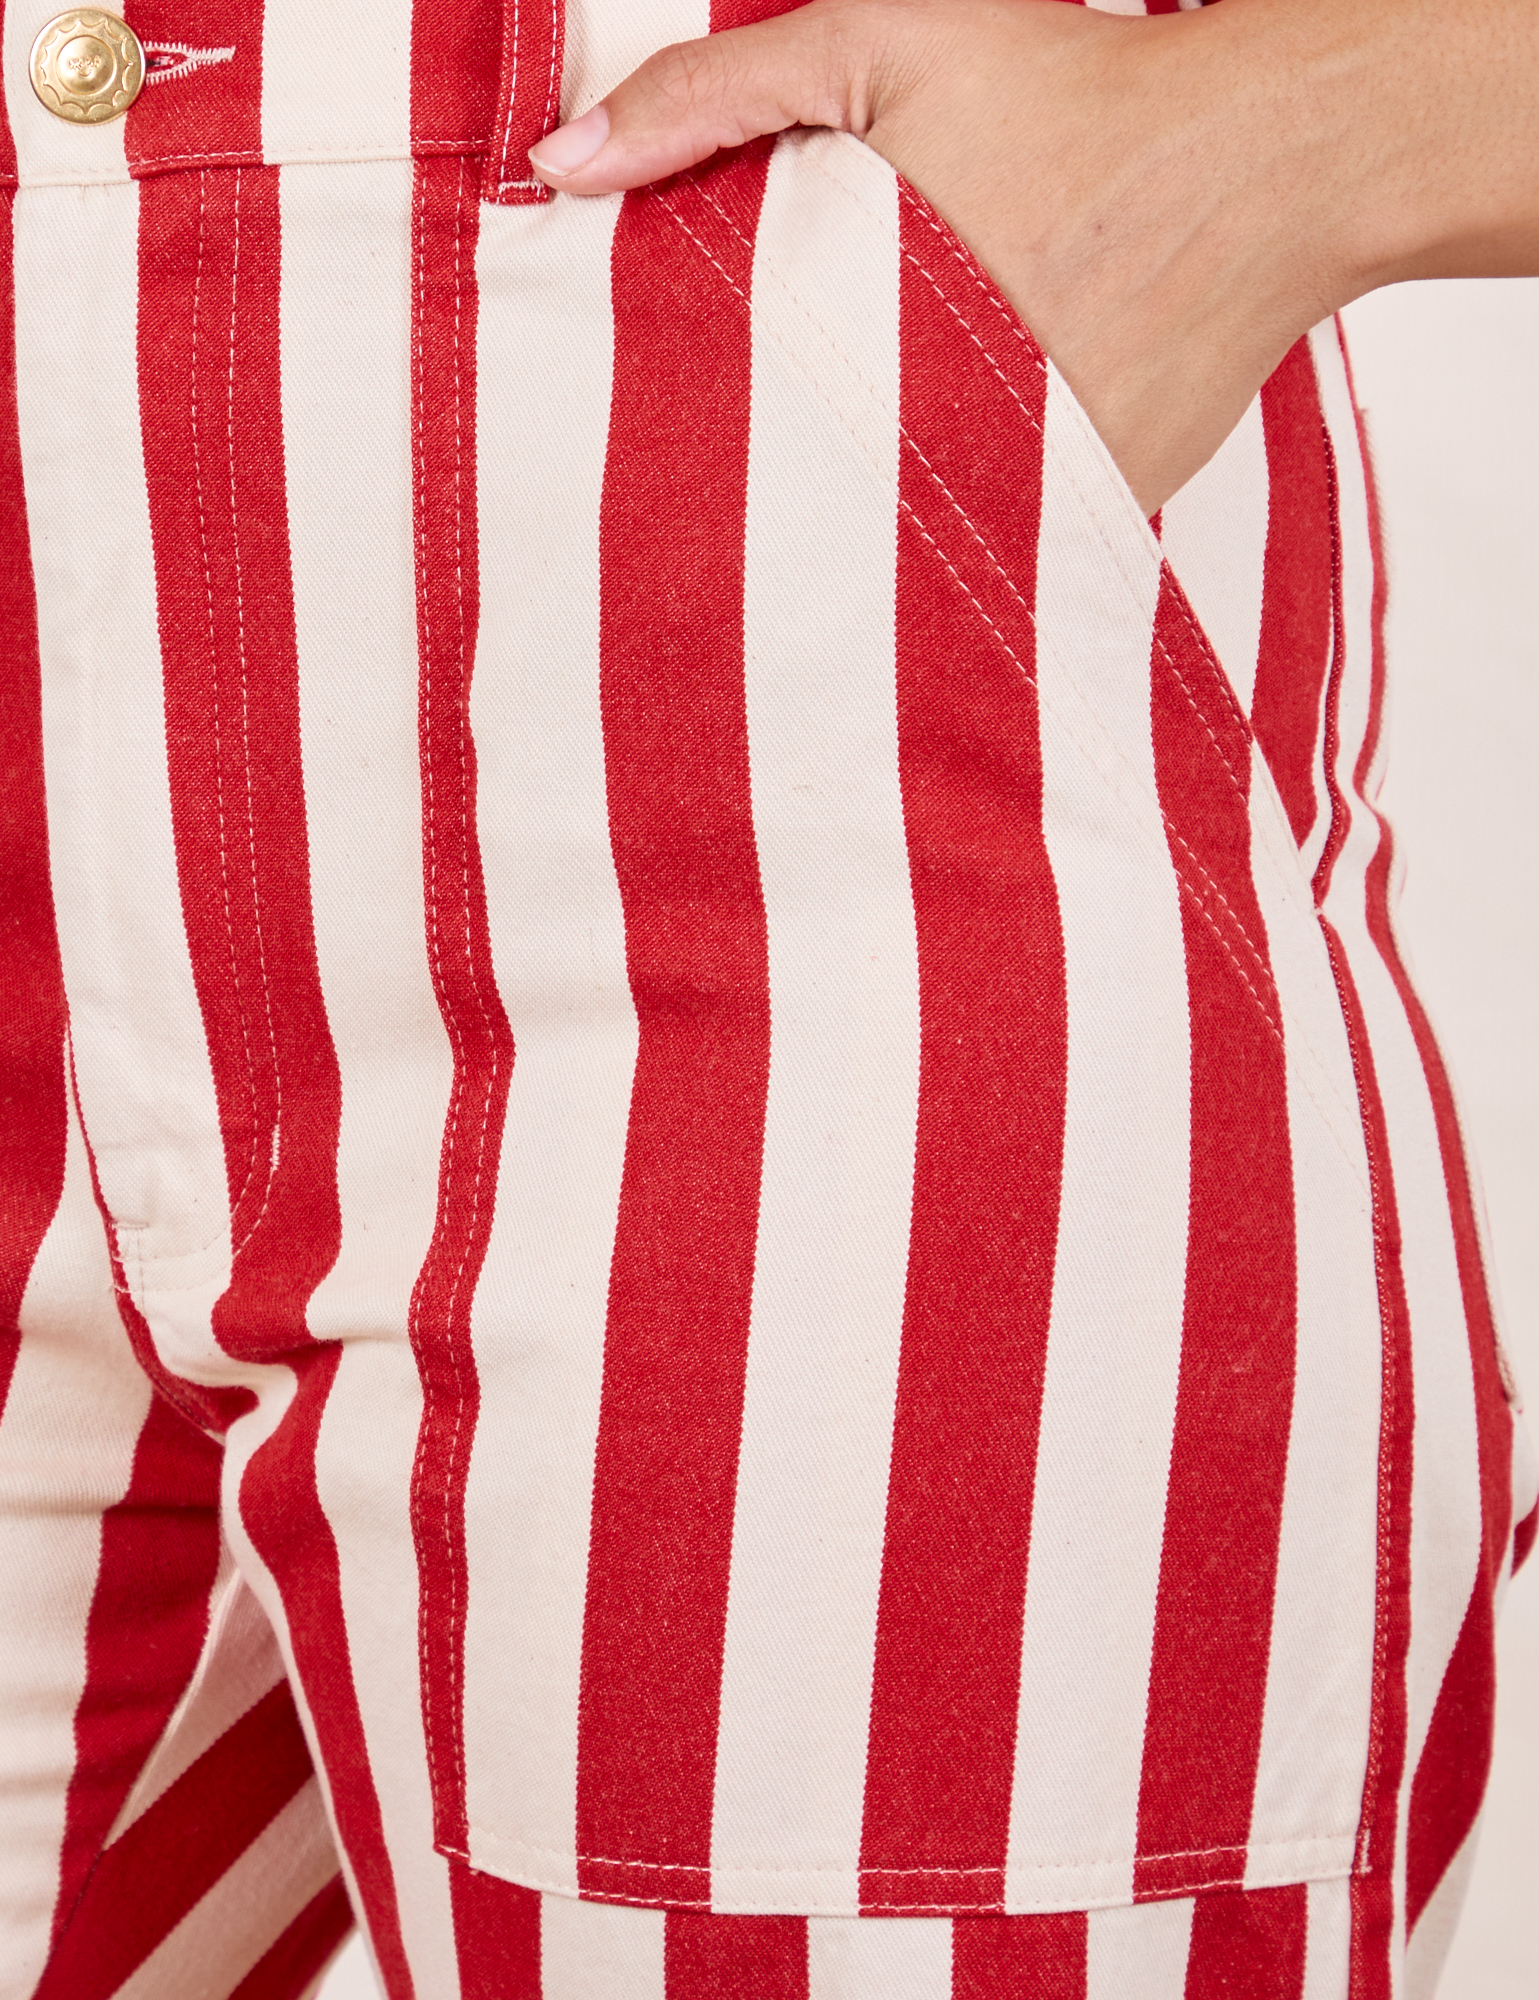 Work Pants in Cherry Stripe front pocket close up. Tiara has her hand in the pocket.